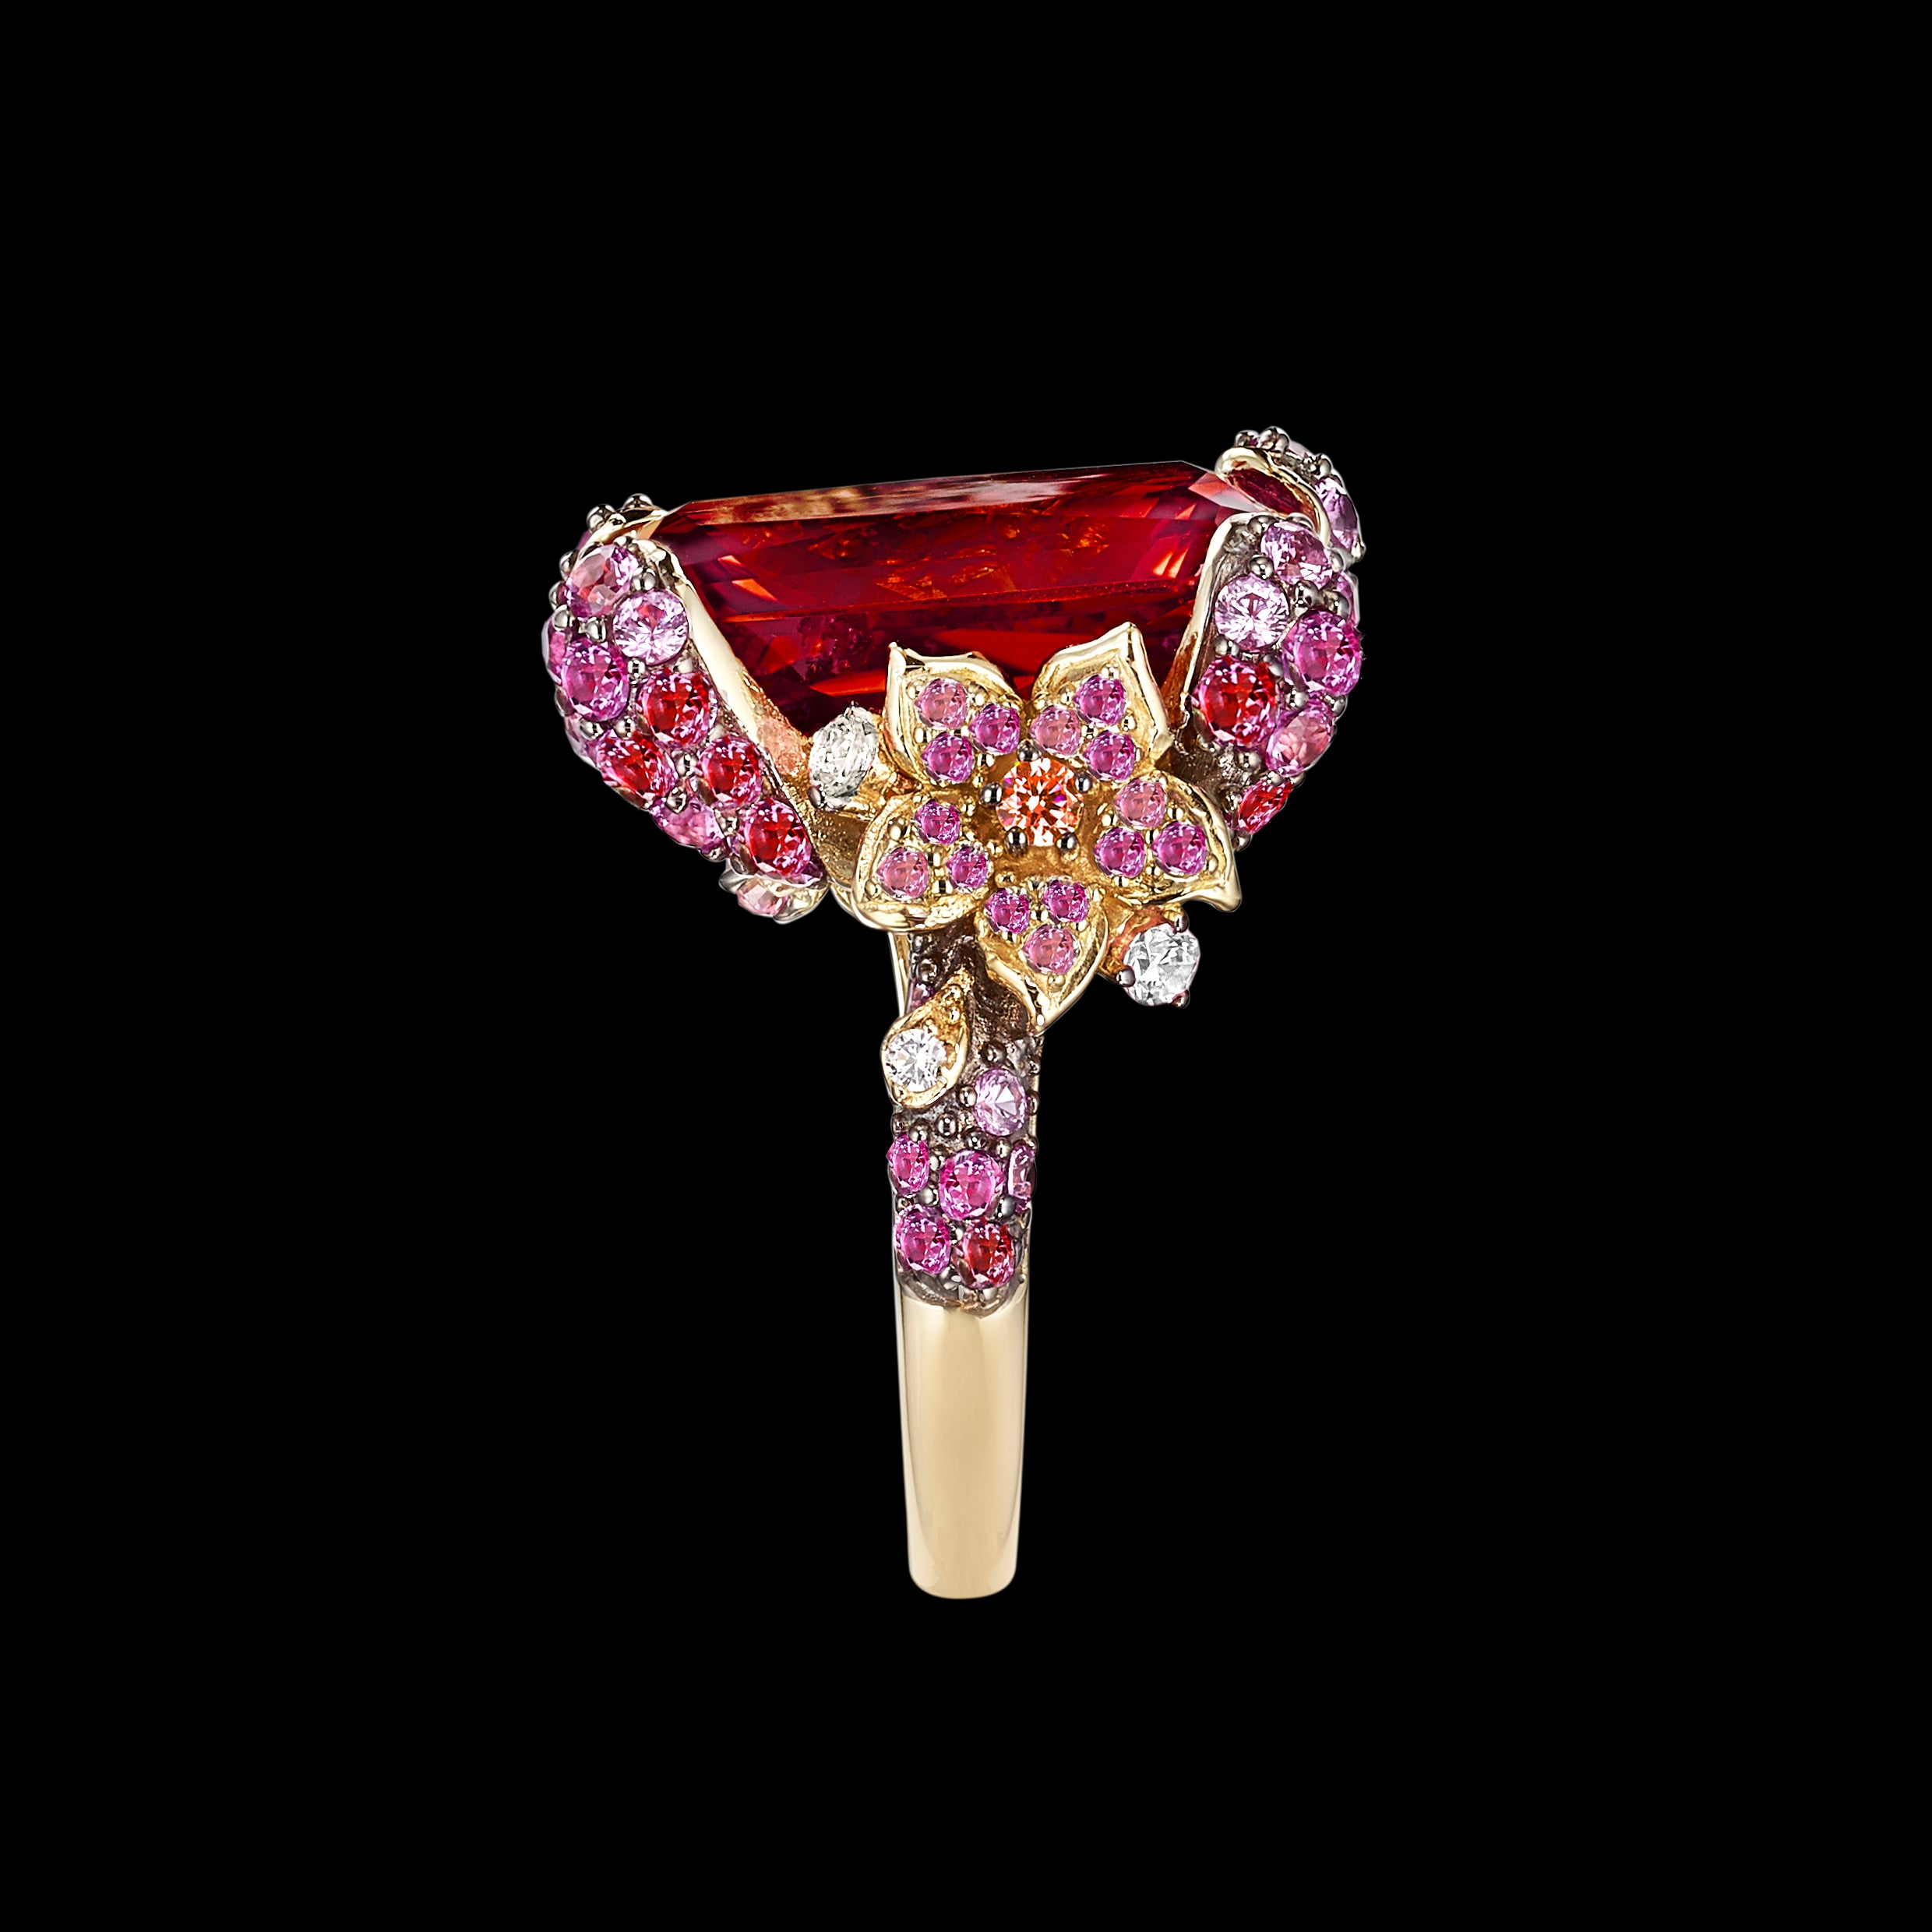 Ruby Cinderella Ring, Ring, Anabela Chan Joaillerie - Fine jewelry with laboratory grown and created gemstones hand-crafted in the United Kingdom. Anabela Chan Joaillerie is the first fine jewellery brand in the world to champion laboratory-grown and created gemstones with high jewellery design, artisanal craftsmanship and a focus on ethical and sustainable innovations.